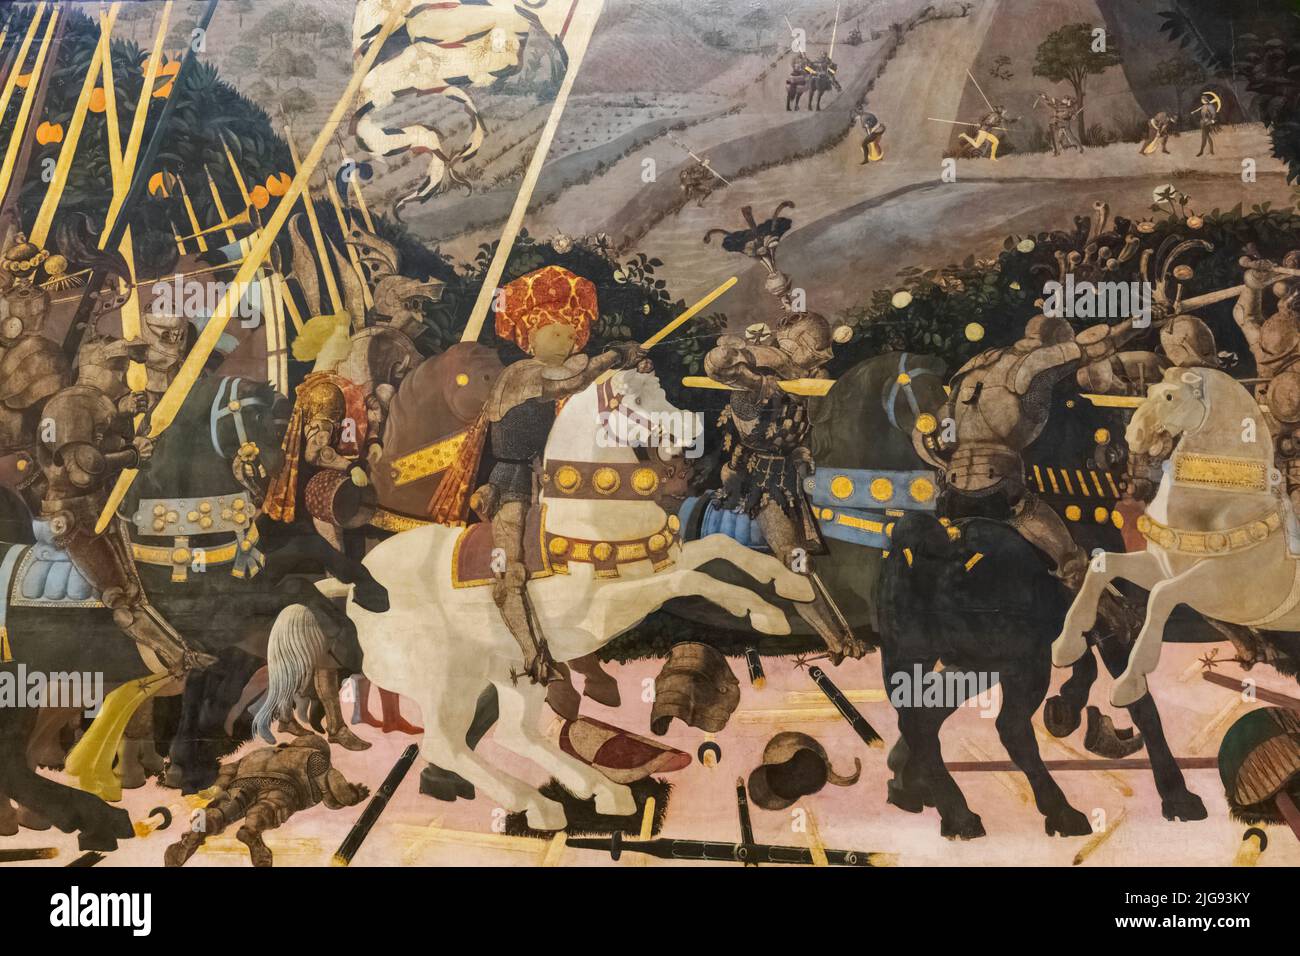 Painting titled 'The Battle of San Romano' by Italian Artist Paolo Uccello dated 1438 Stock Photo